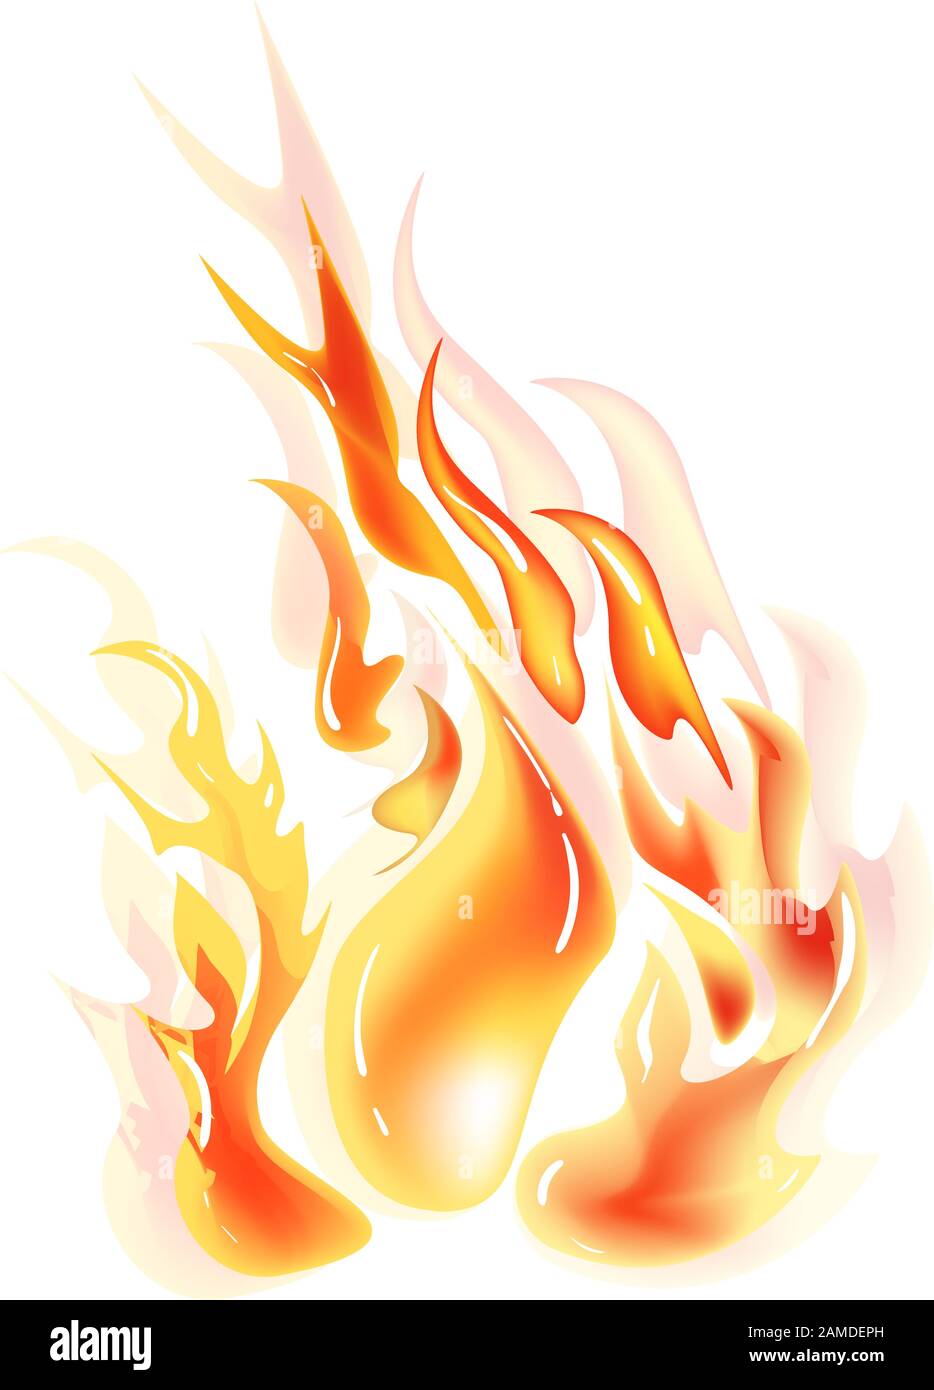 Fire flames vector illustration isolated. Stock Vector